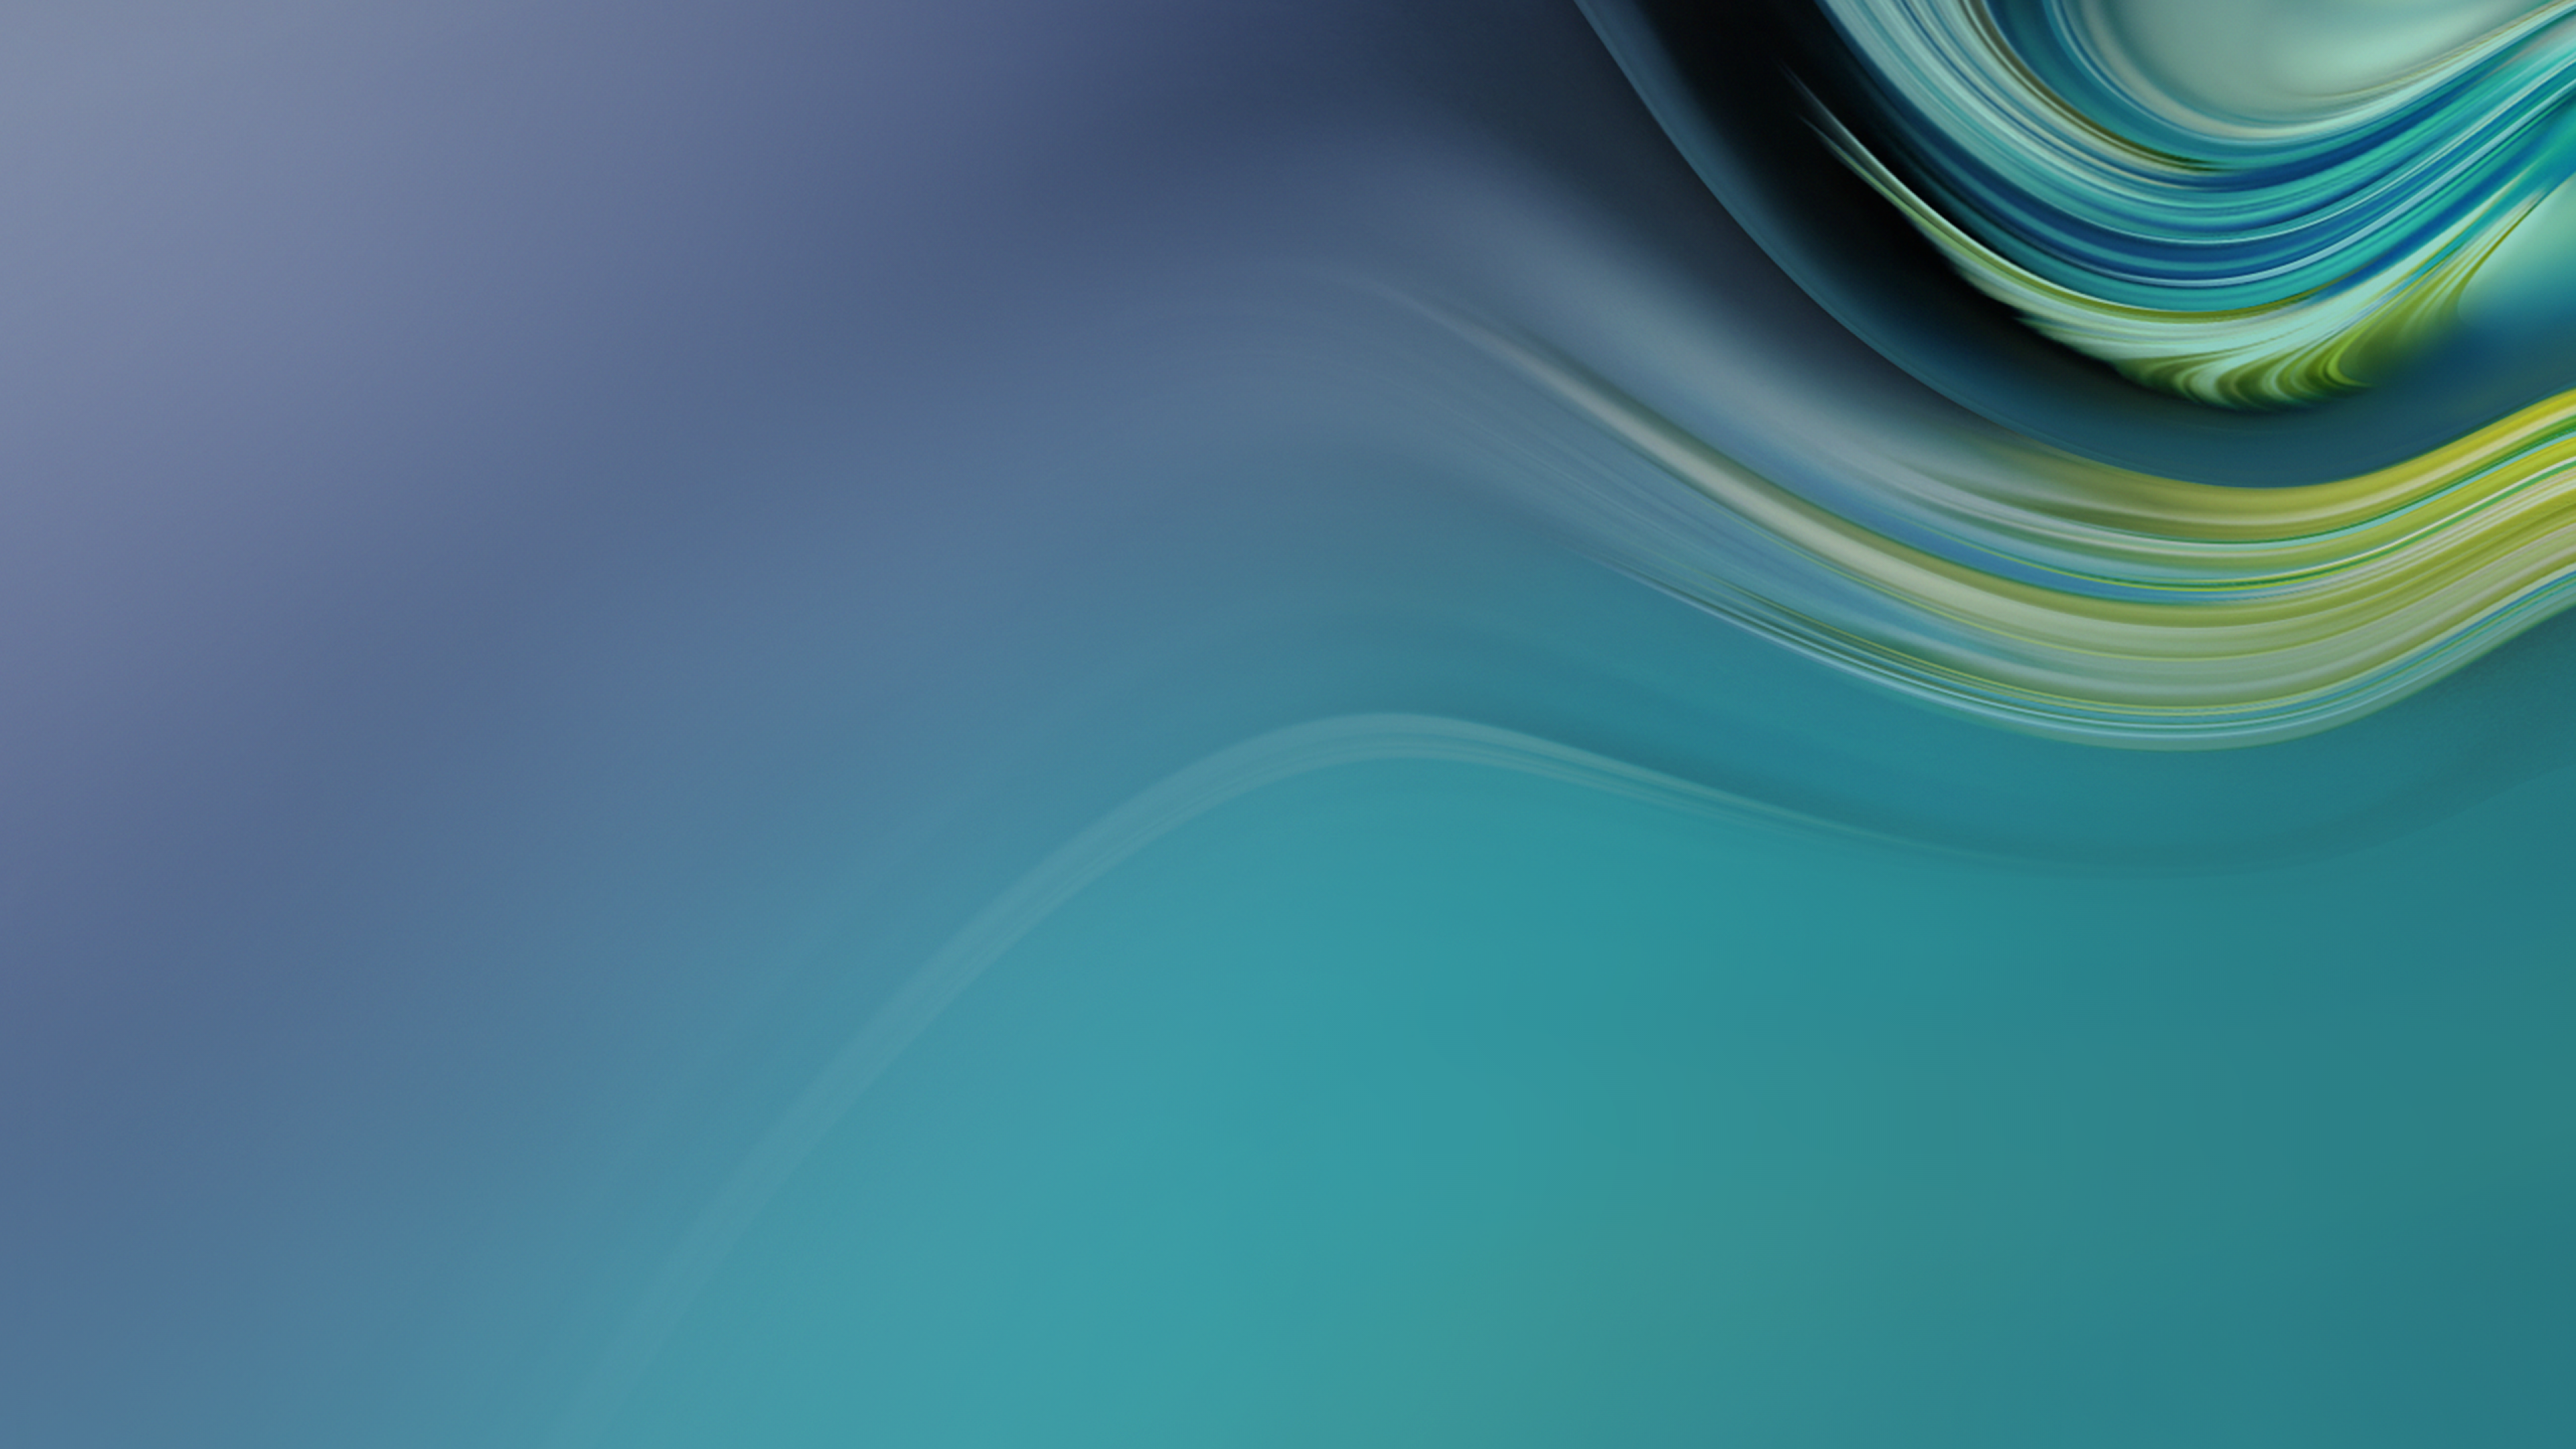 Wallpaper Waves, Gradient, Teal, Turquoise, Samsung Galaxy Tab S4